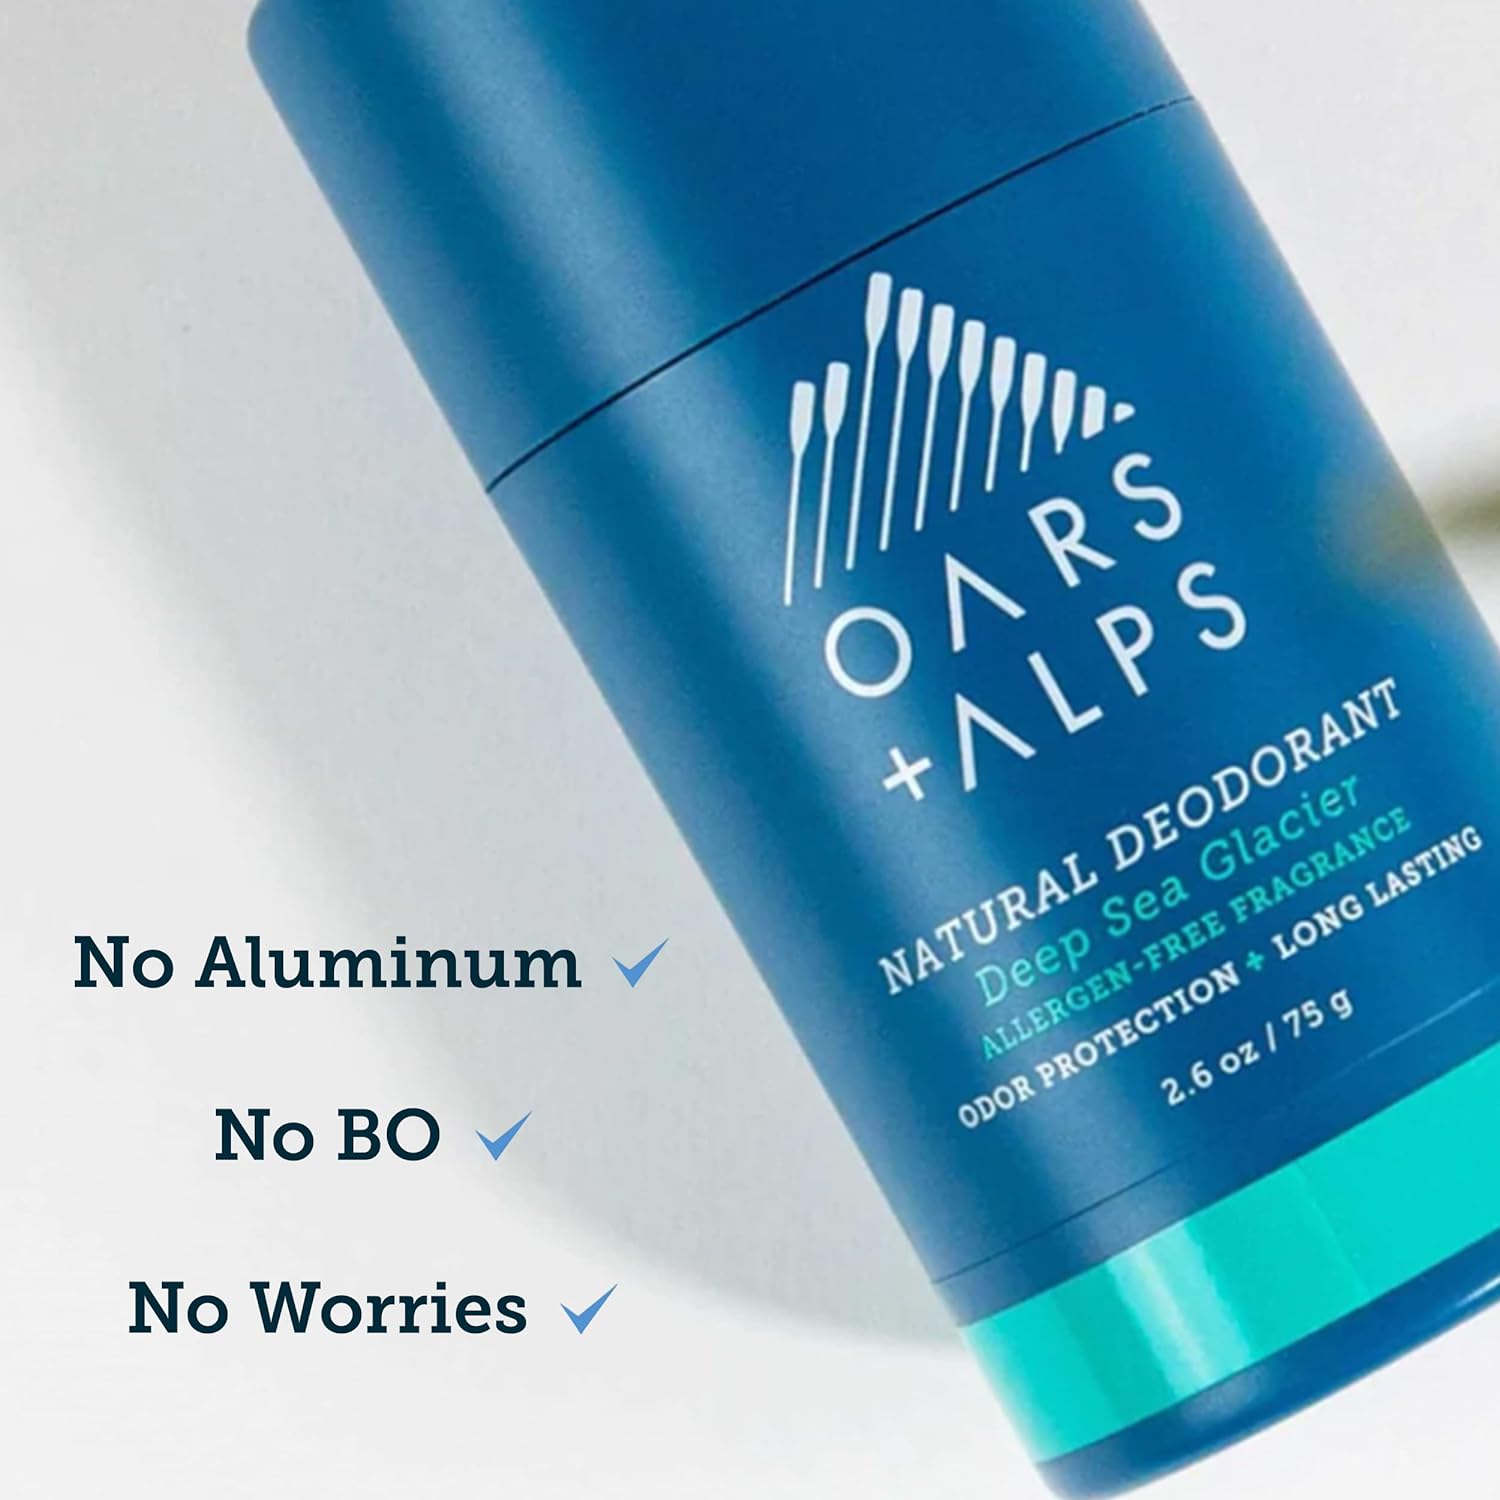 Oars + Alps Aluminum Free Deodorant for Men and Women, Dermatologist Tested, Travel Size, Deep Sea Glacier, 1 Pack, 2.6 Oz : Beauty & Personal Care